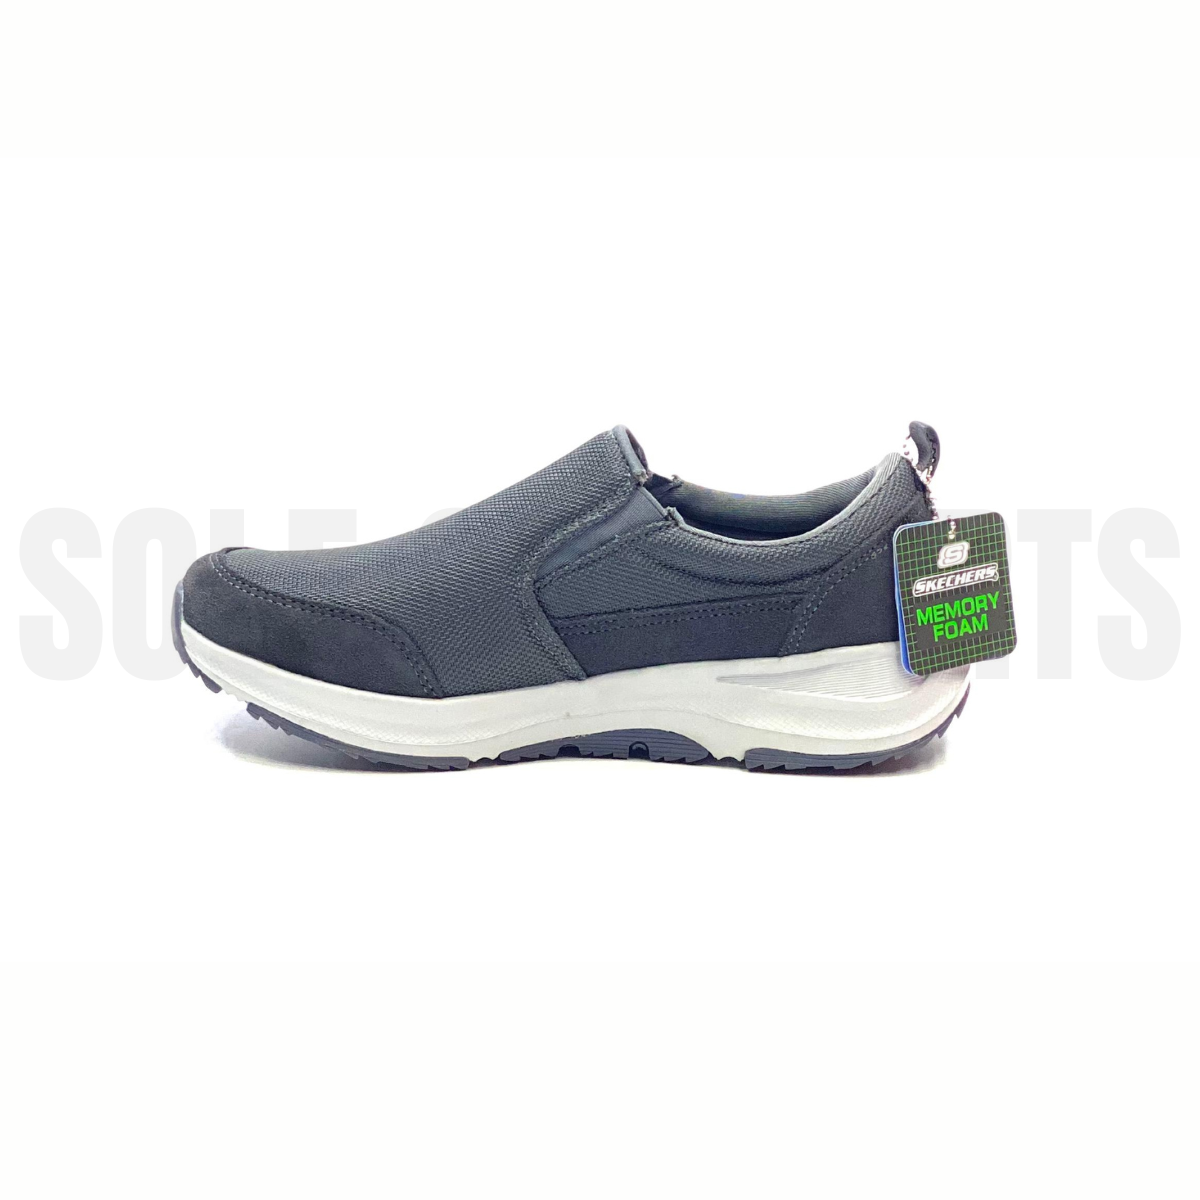 SKECHERS Arch Fit GOOD YEAR (GRAY)